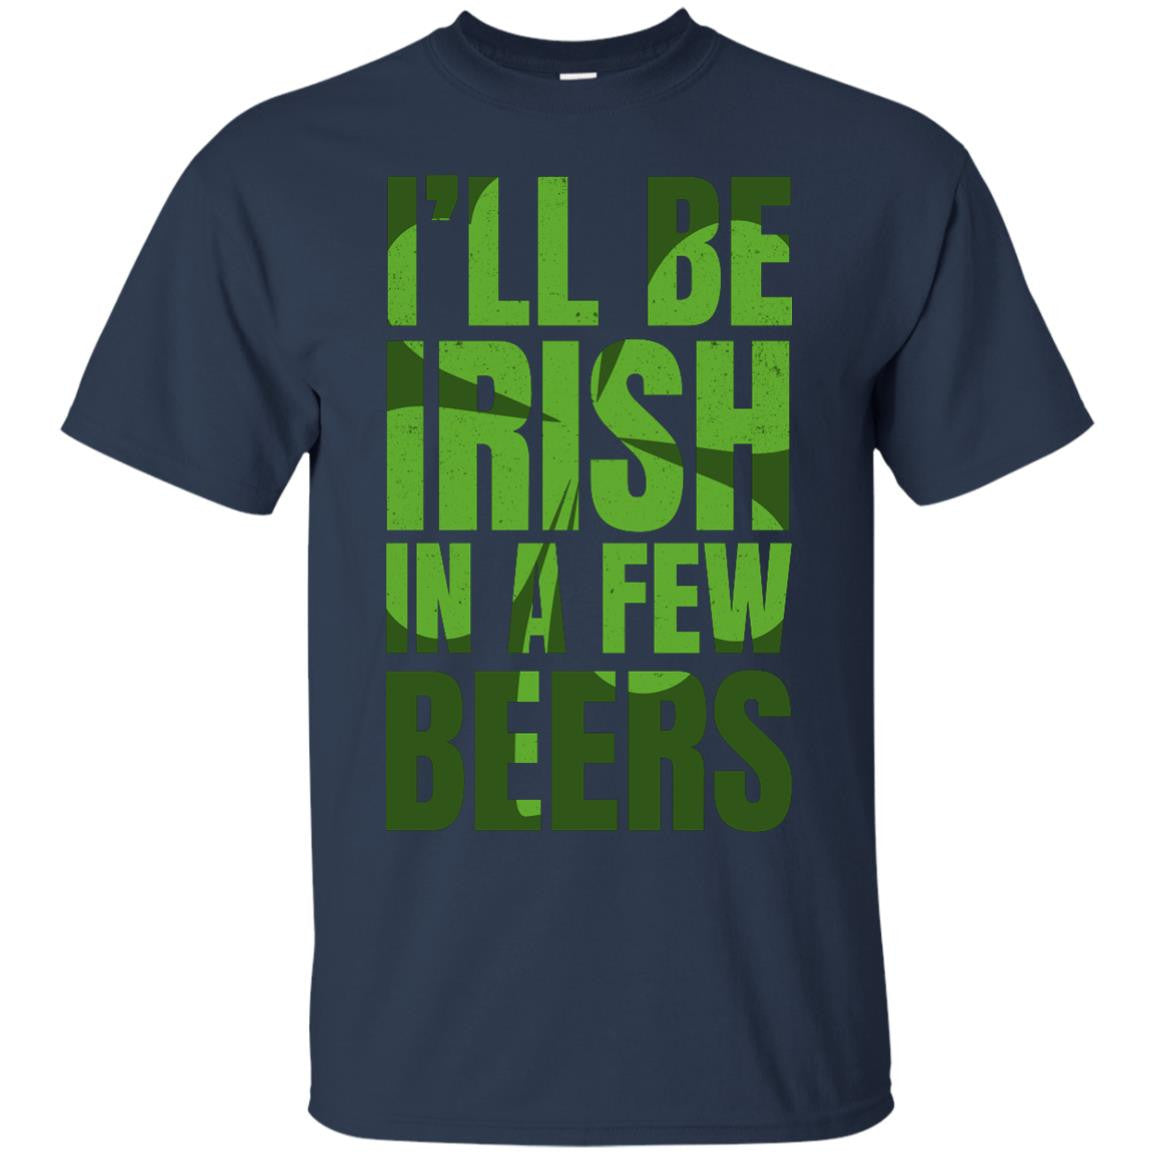 I'll Be Irish In A Few Beers T-Shirt Apparel - The Beer Lodge